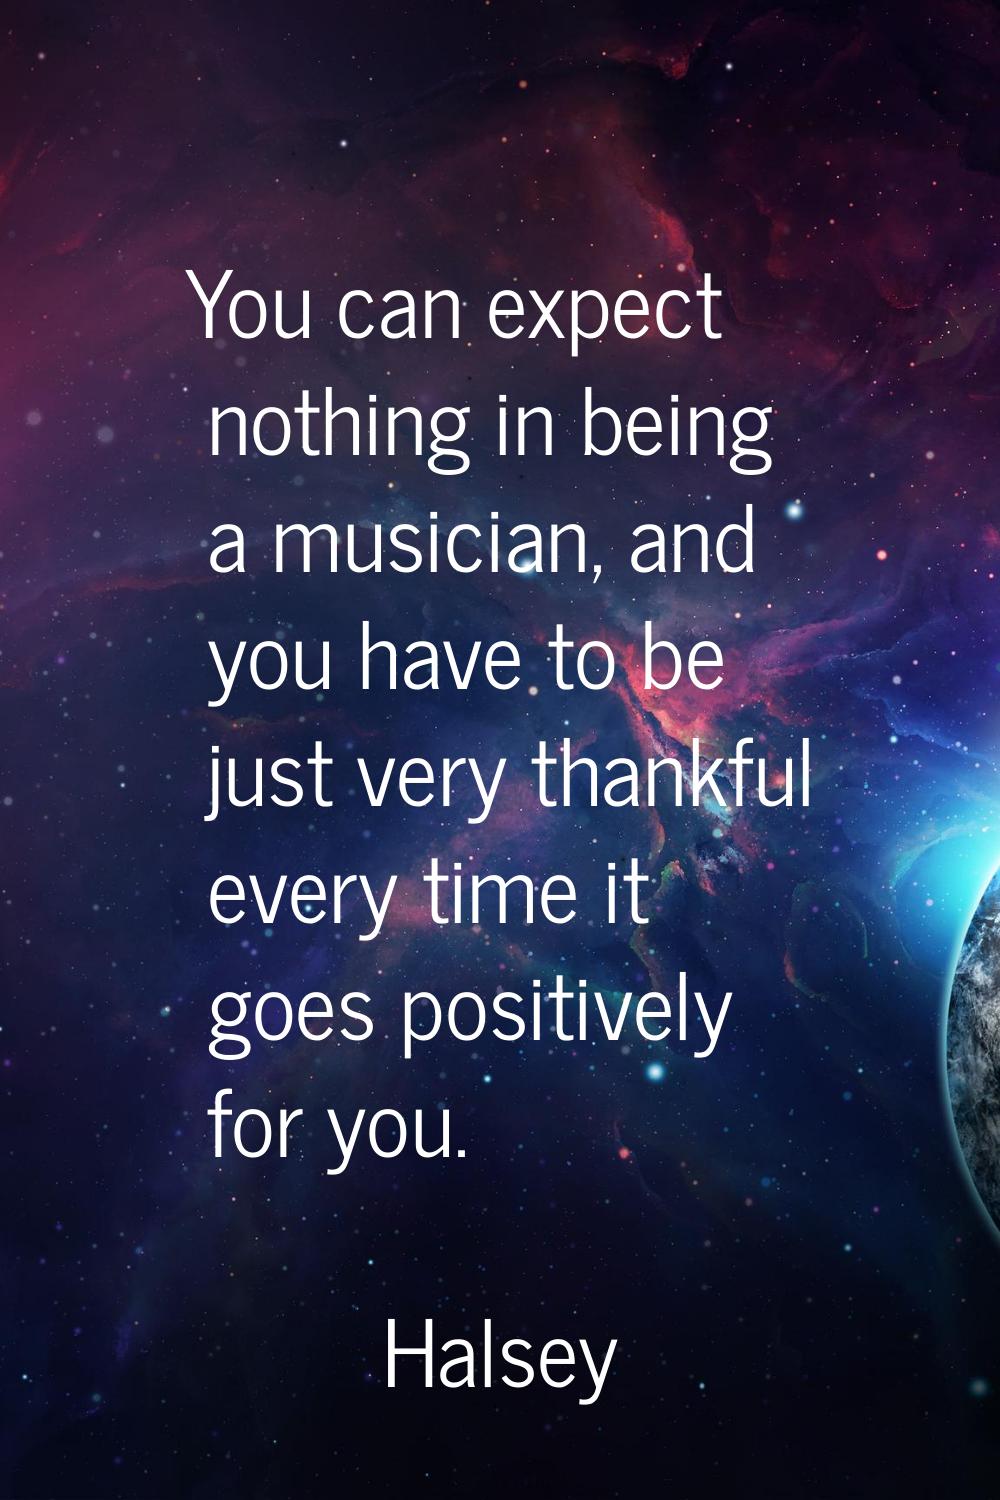 You can expect nothing in being a musician, and you have to be just very thankful every time it goe